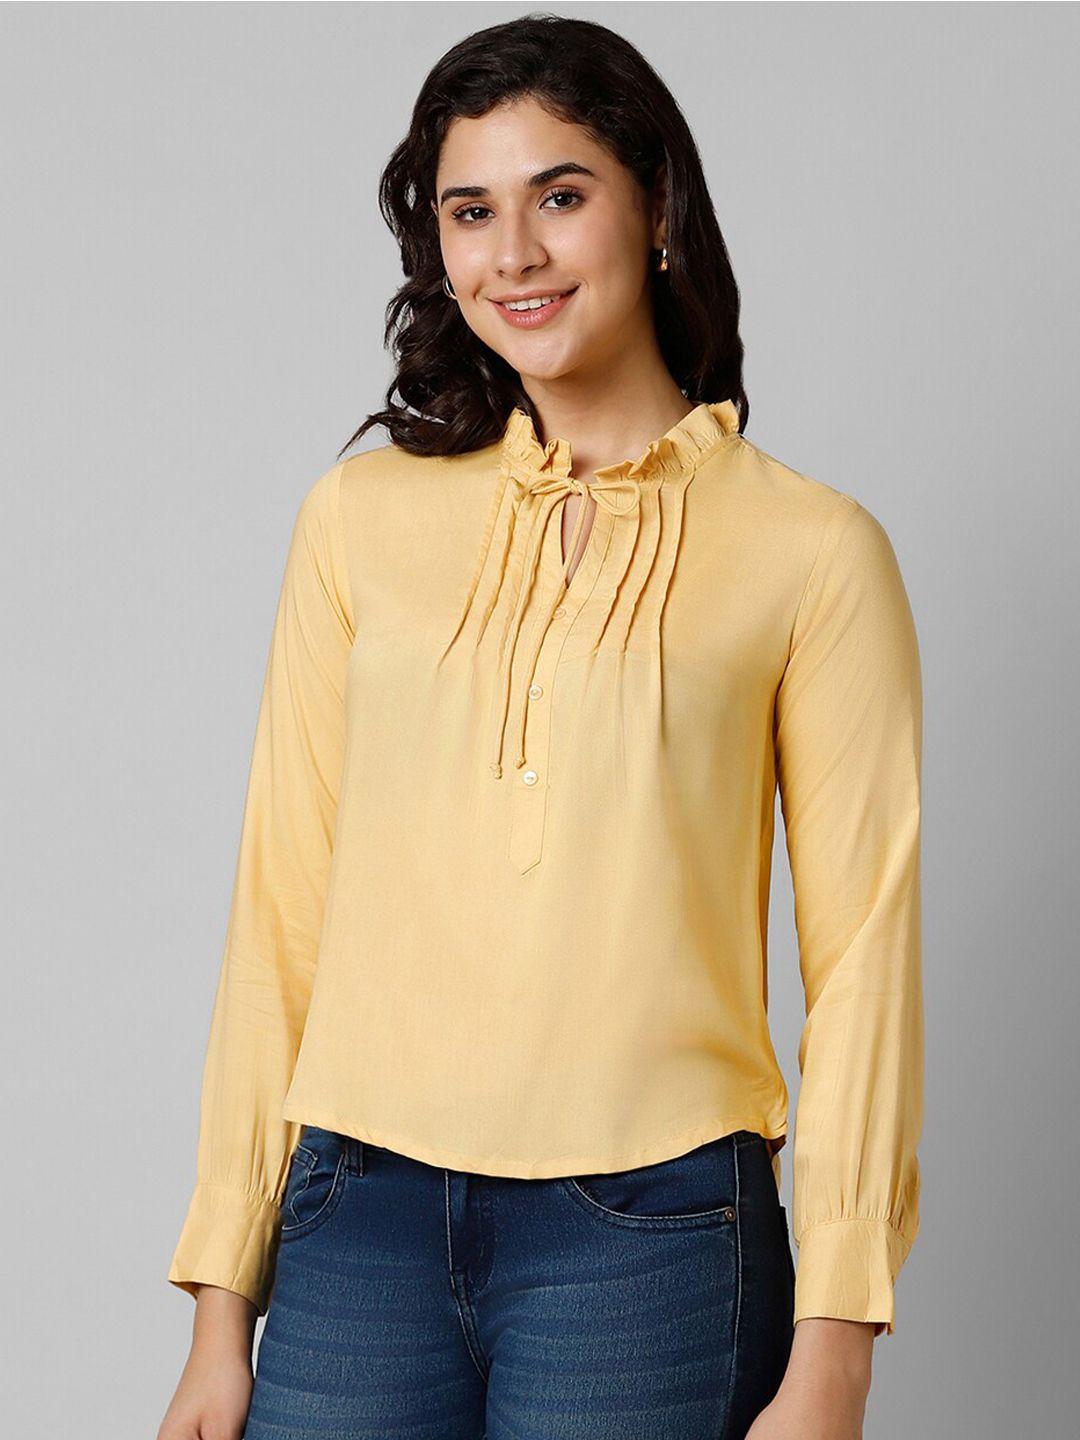 pantaloons tie-up neck pleated cuffed sleeves top